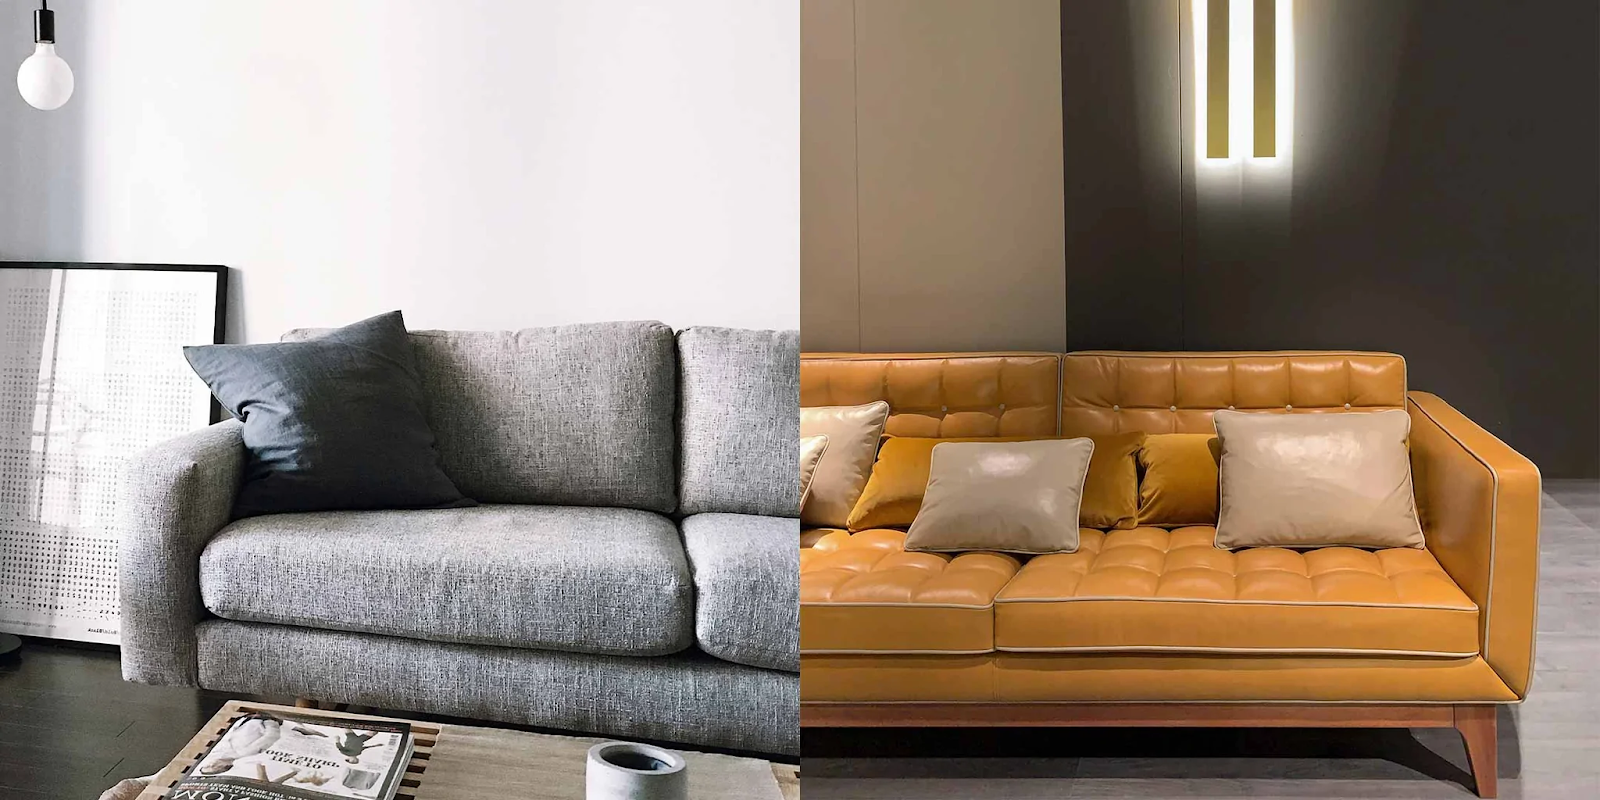 Things to Consider Before Buying A Sofa: Sofa Buying Guide